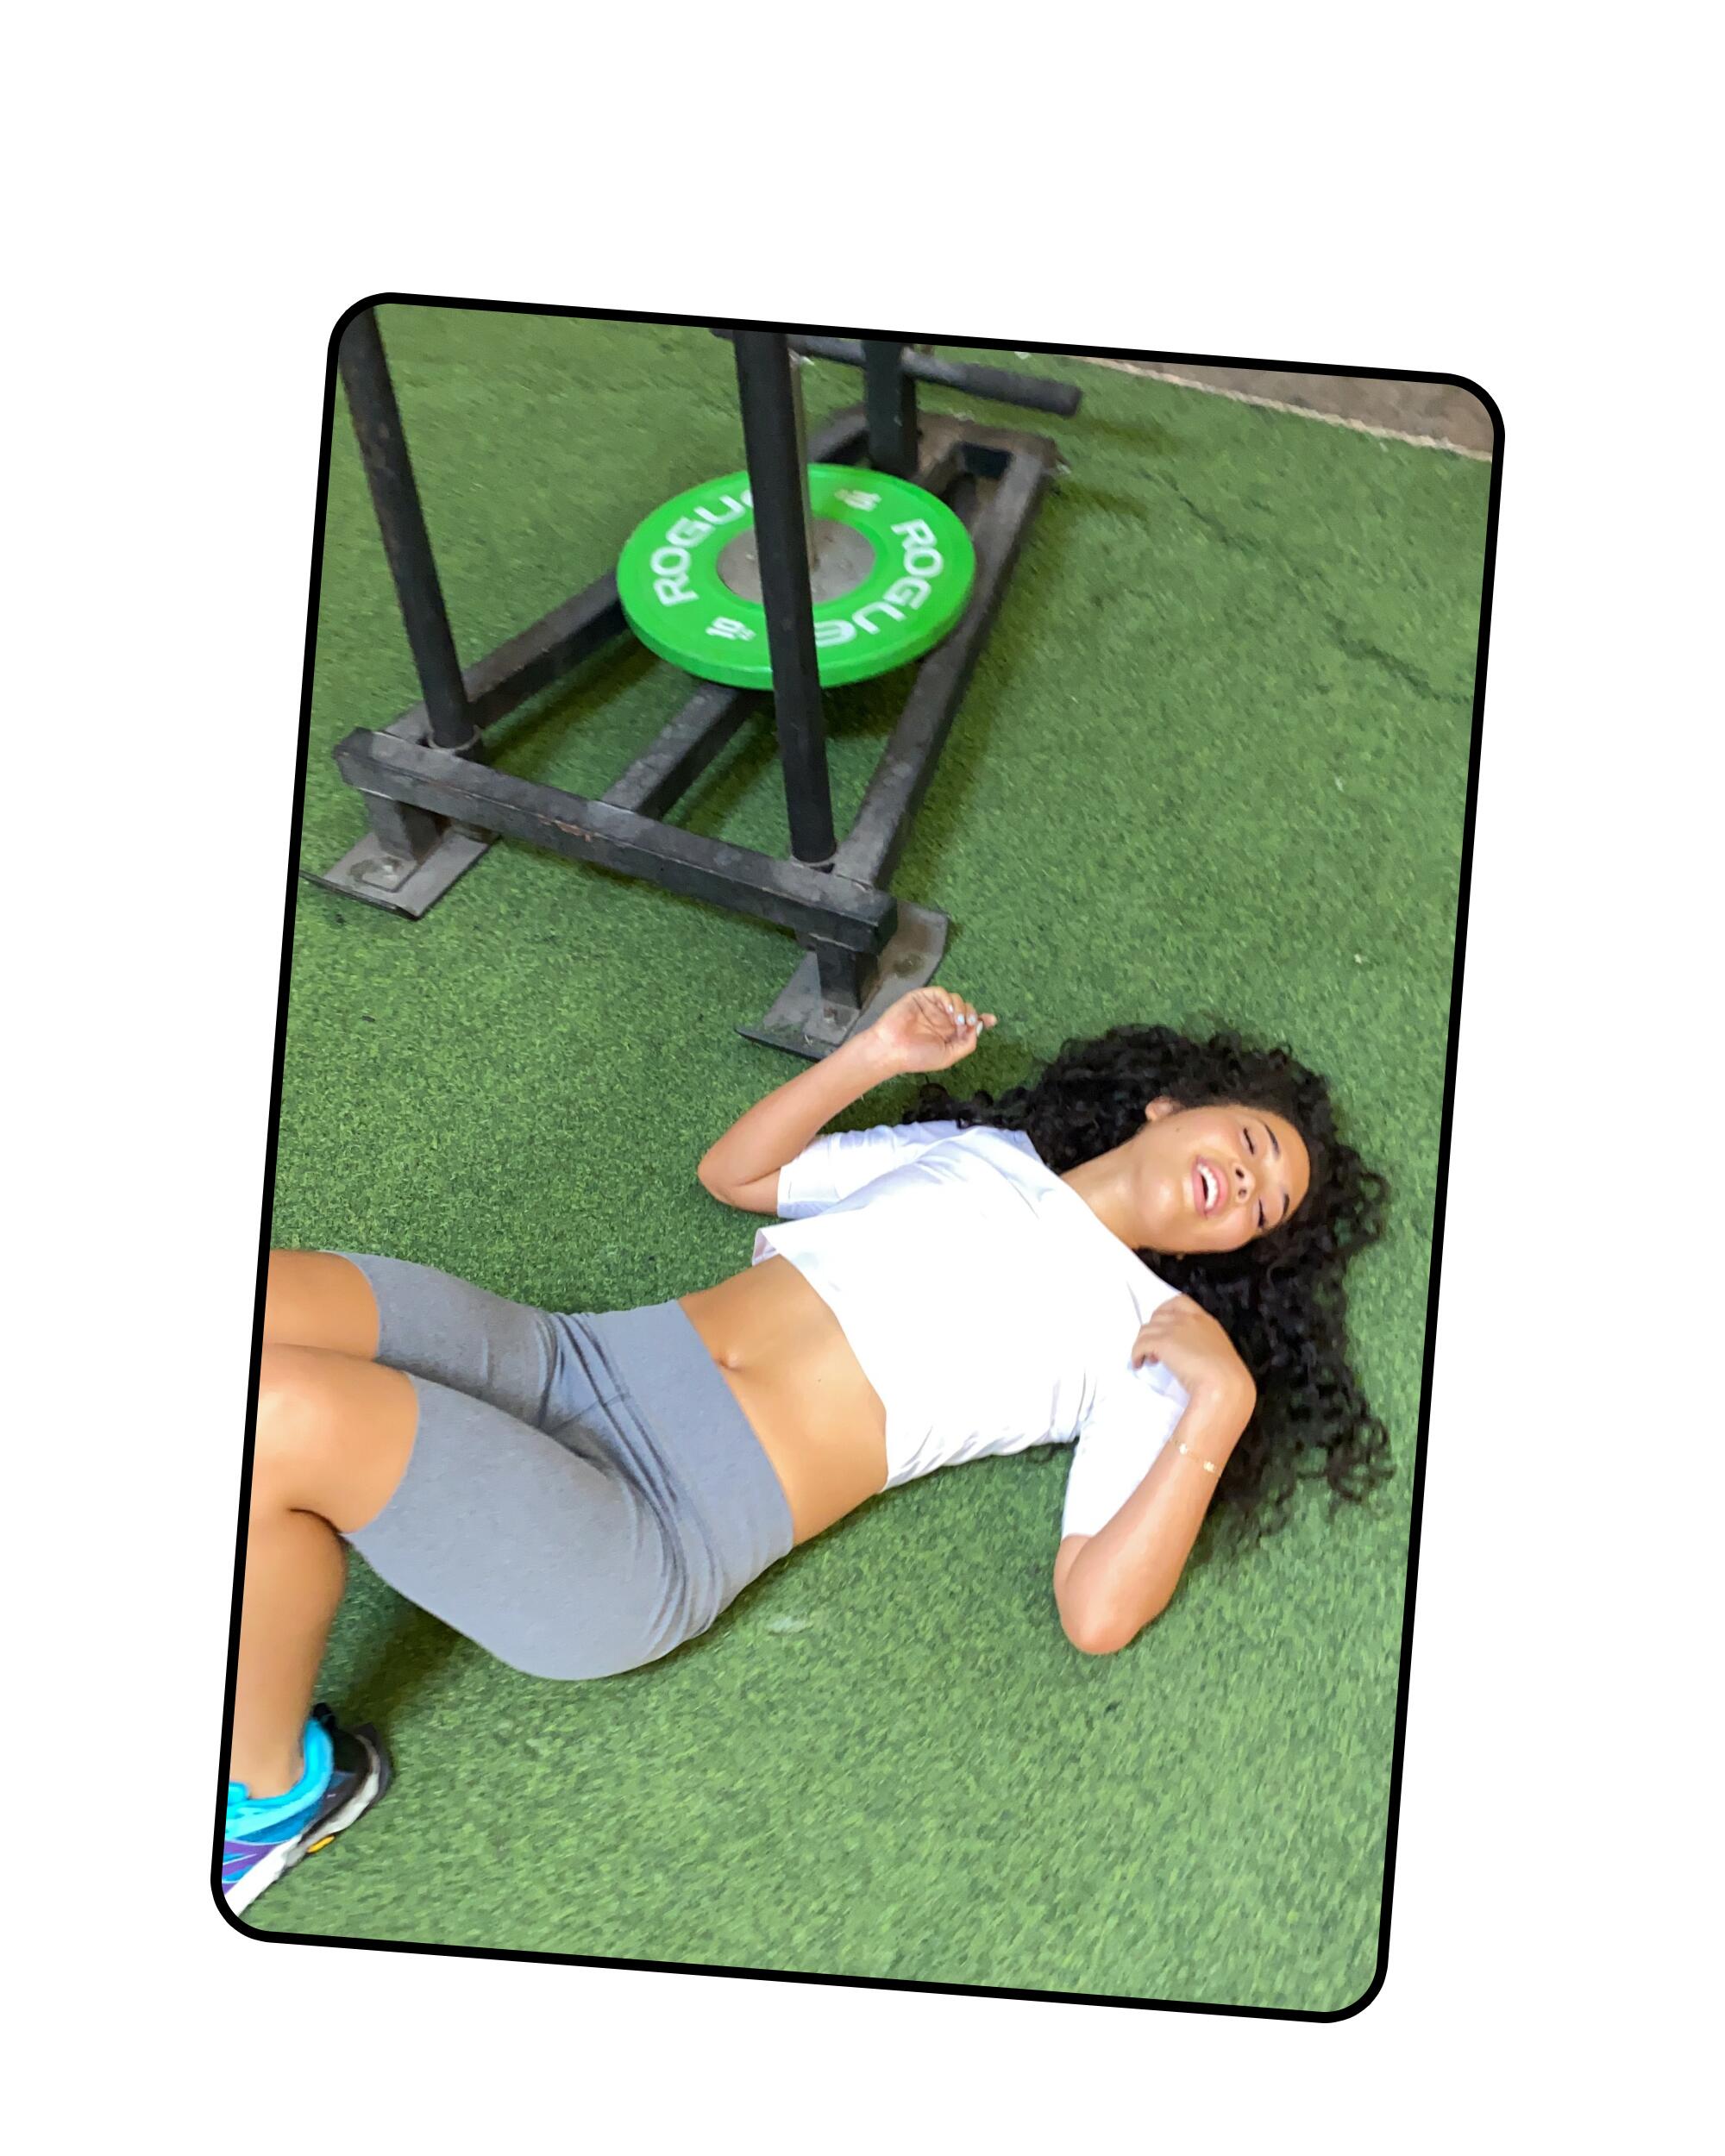 A woman with long curly hair lies down next to gym equipment